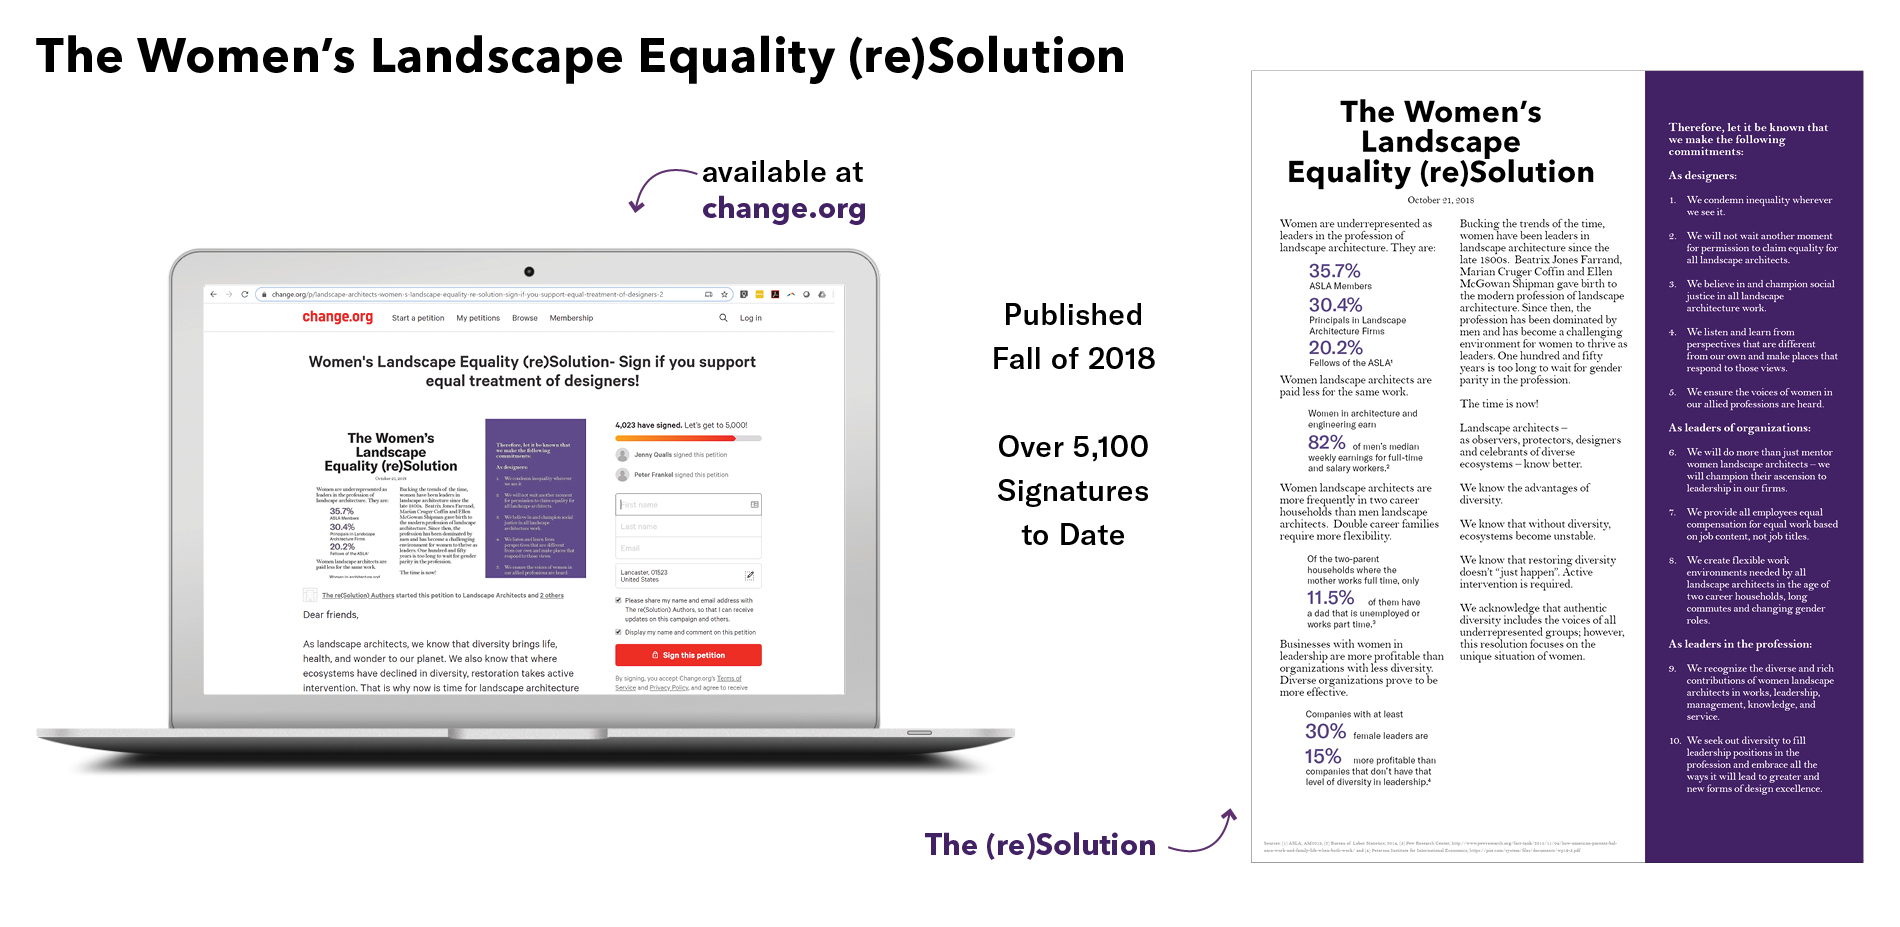 The Women’s Landscape Equality (re)Solution